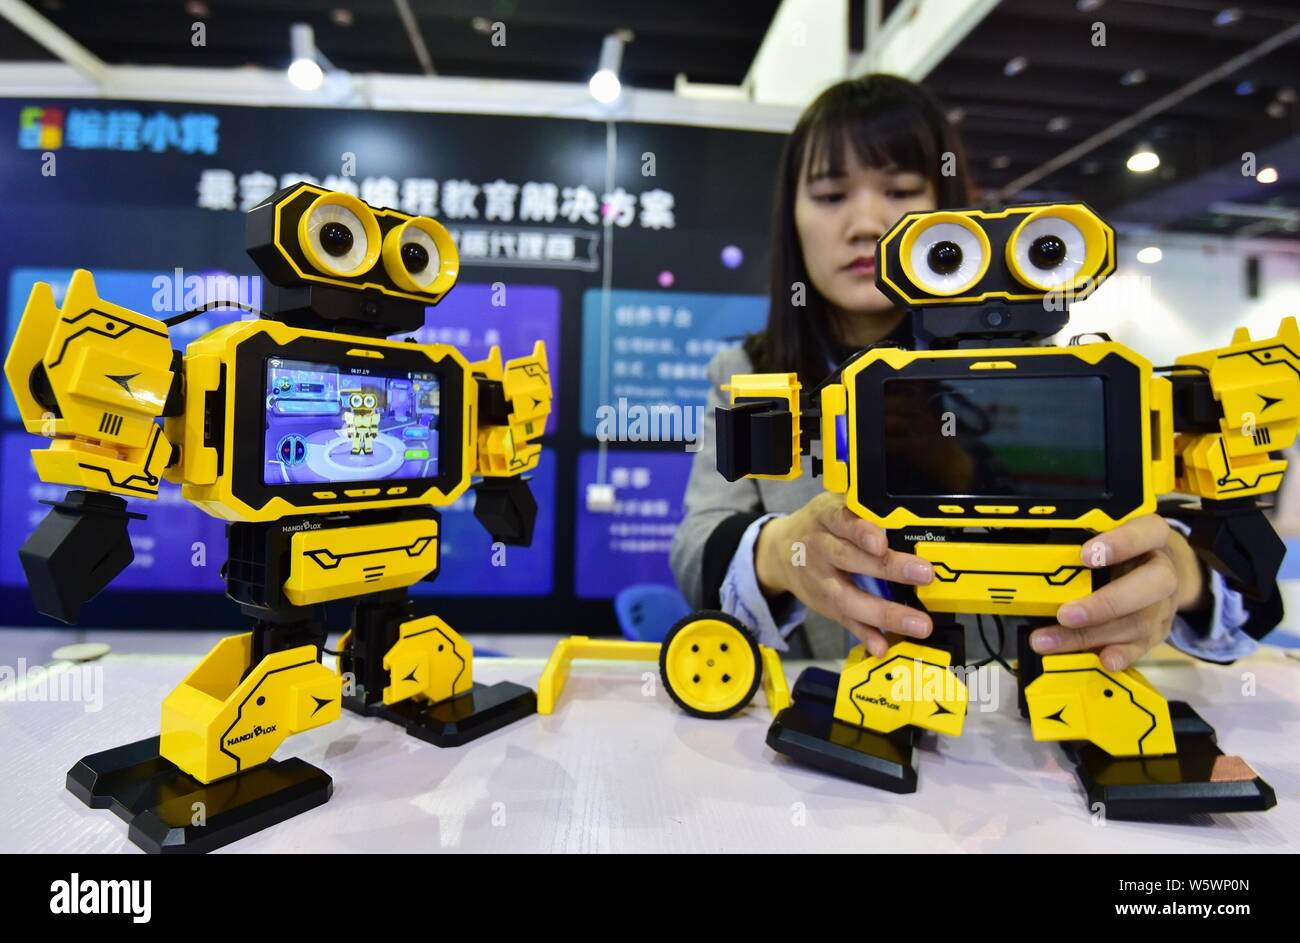 Educational companion robots 'Xiaowu' are on display during the 5th China Yiwu International Manufacturing Equipment Expo in Yiwu city, Jinhua city, e Stock Photo